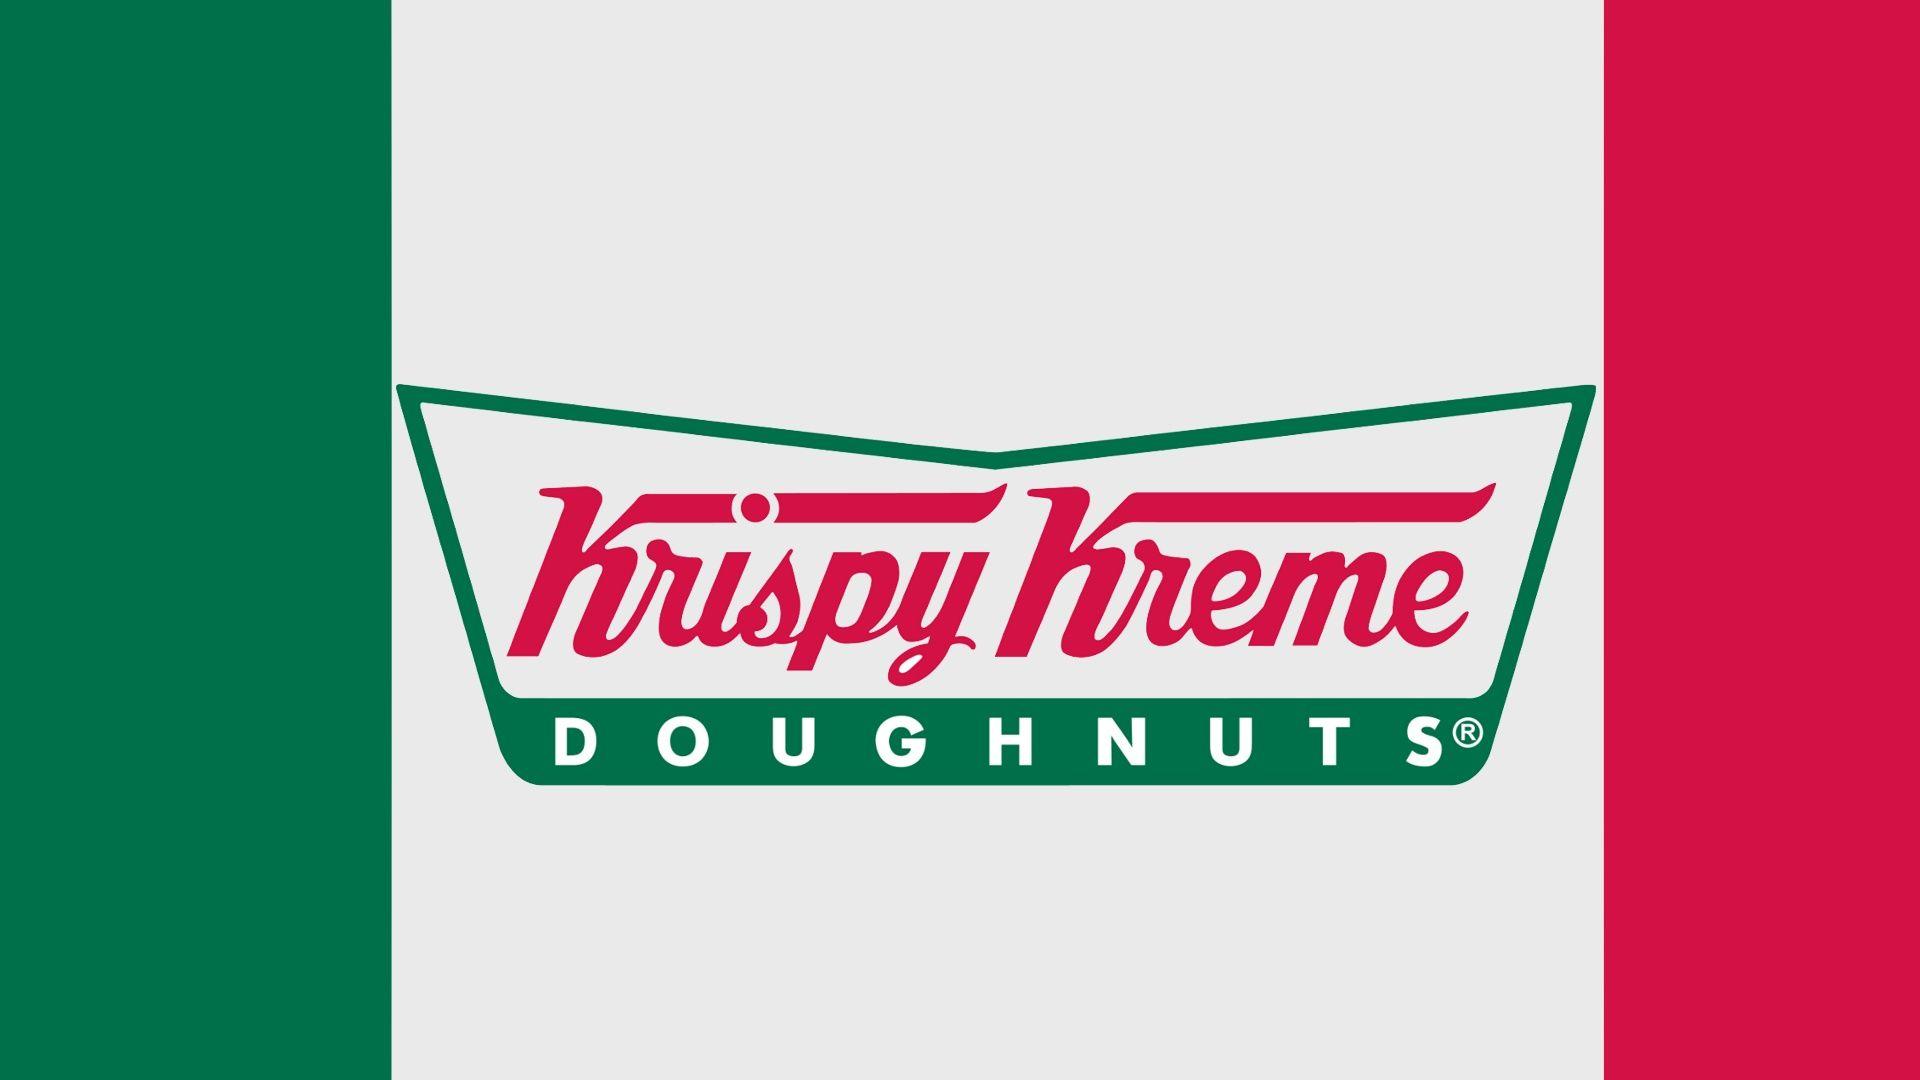 There's A Black Market For Krispy Kreme Donuts, And This Family Is